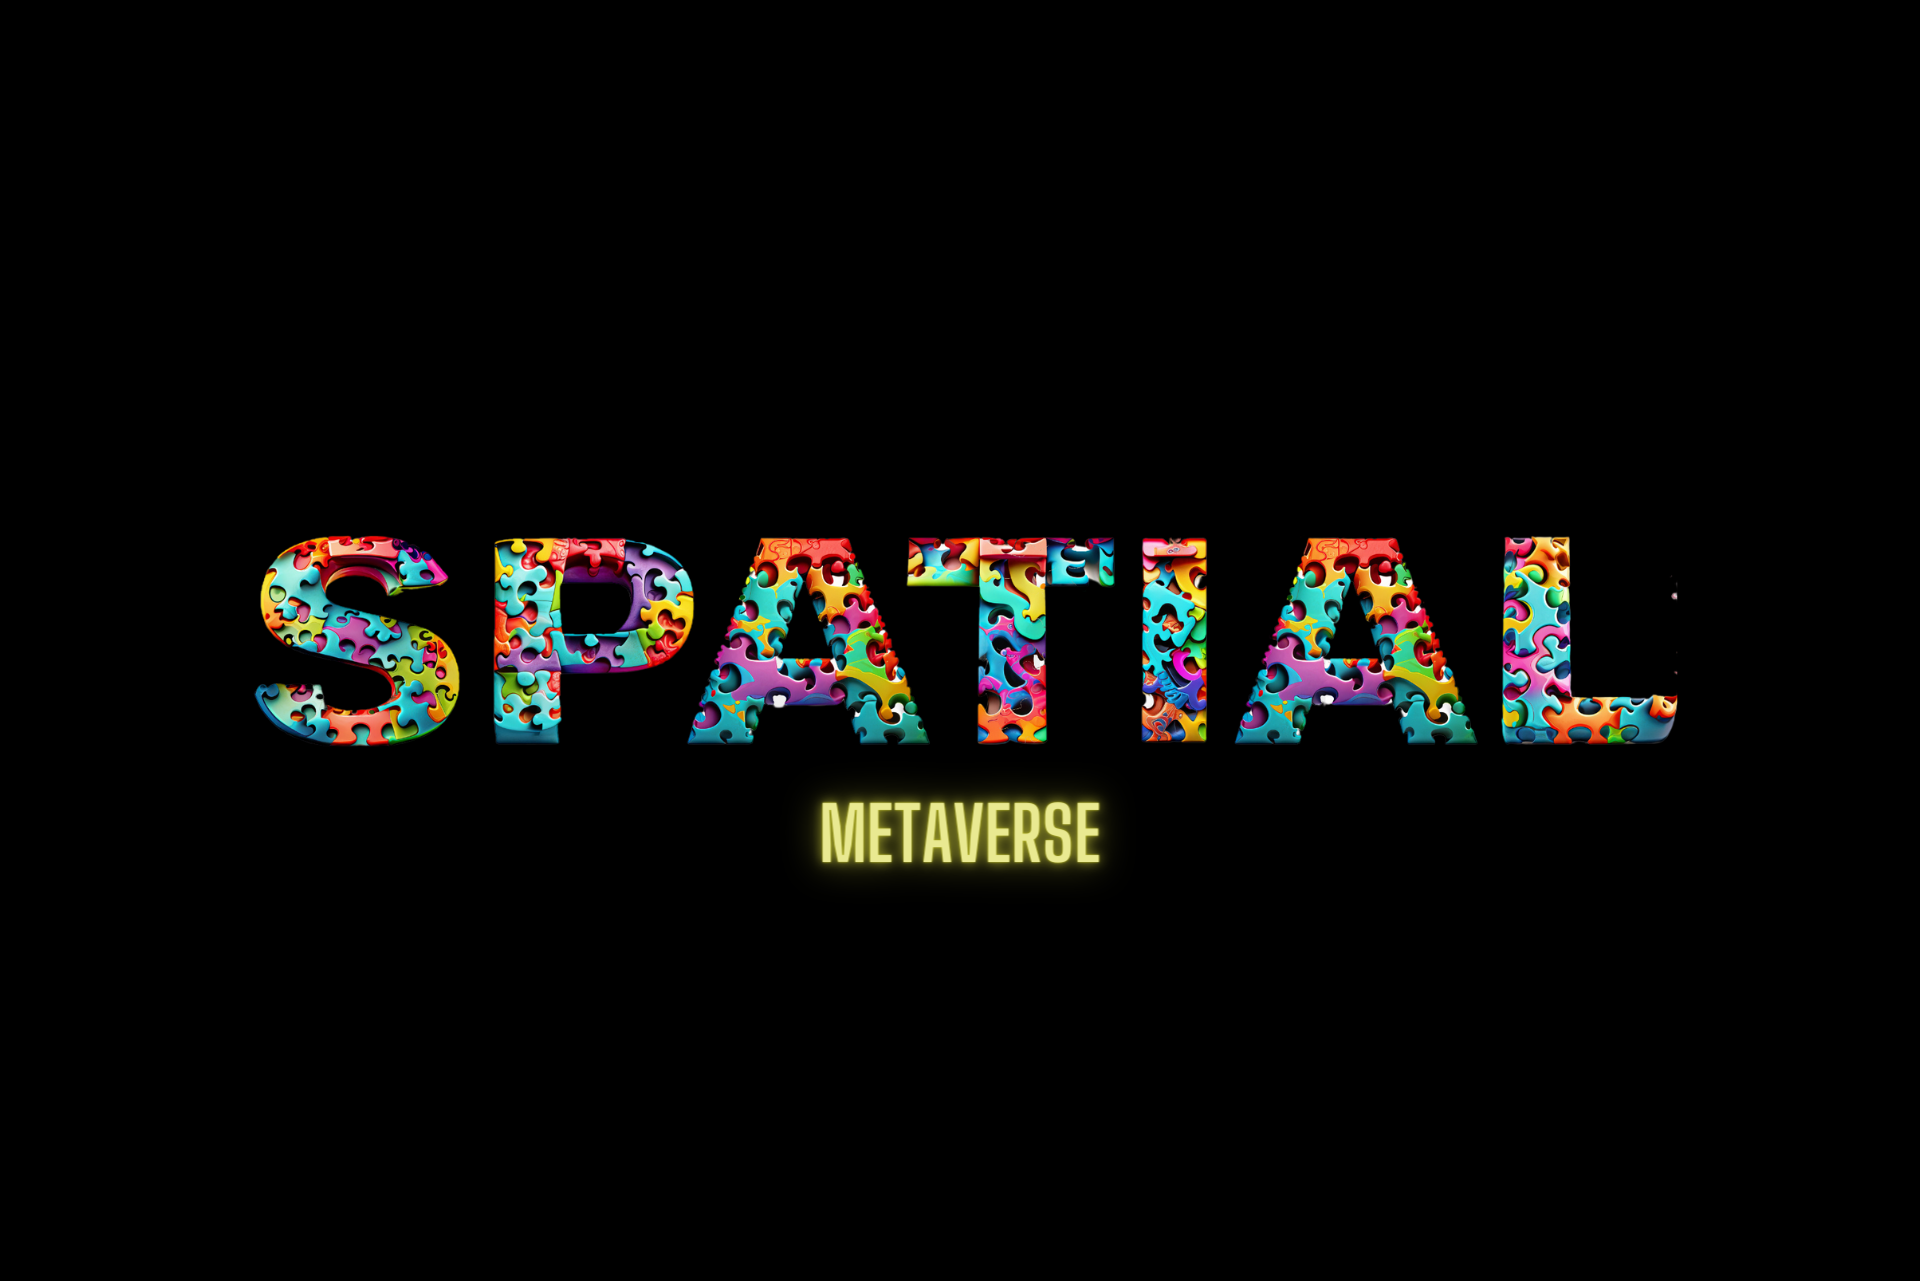 the word spatial is made up of colorful letters on a black background .